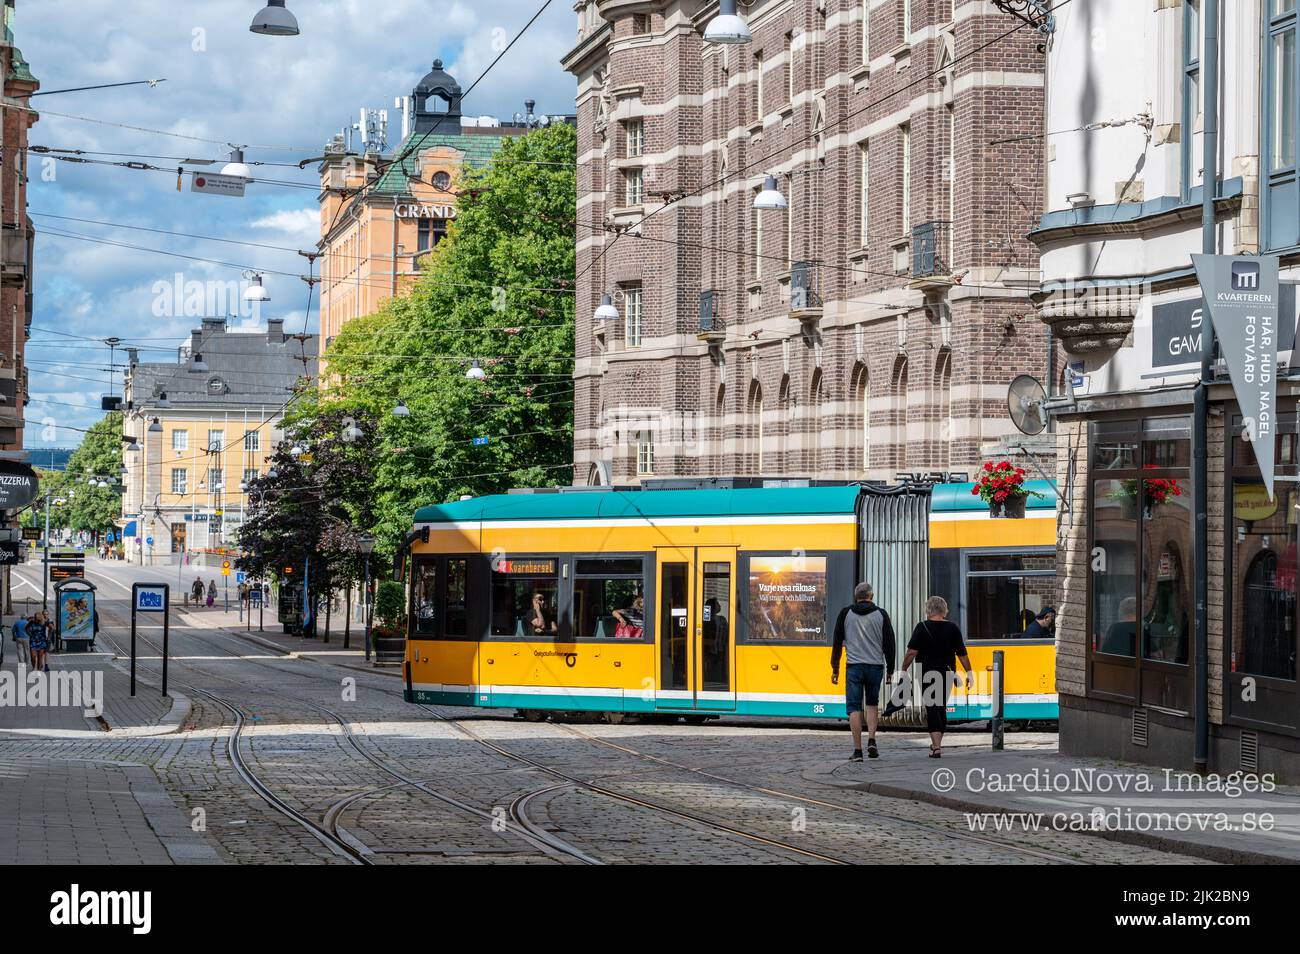 Tram on main street Drottninggatan in the city center of Norrkoping, Sweden. Norrkoping is a historic industrial town. Stock Photo